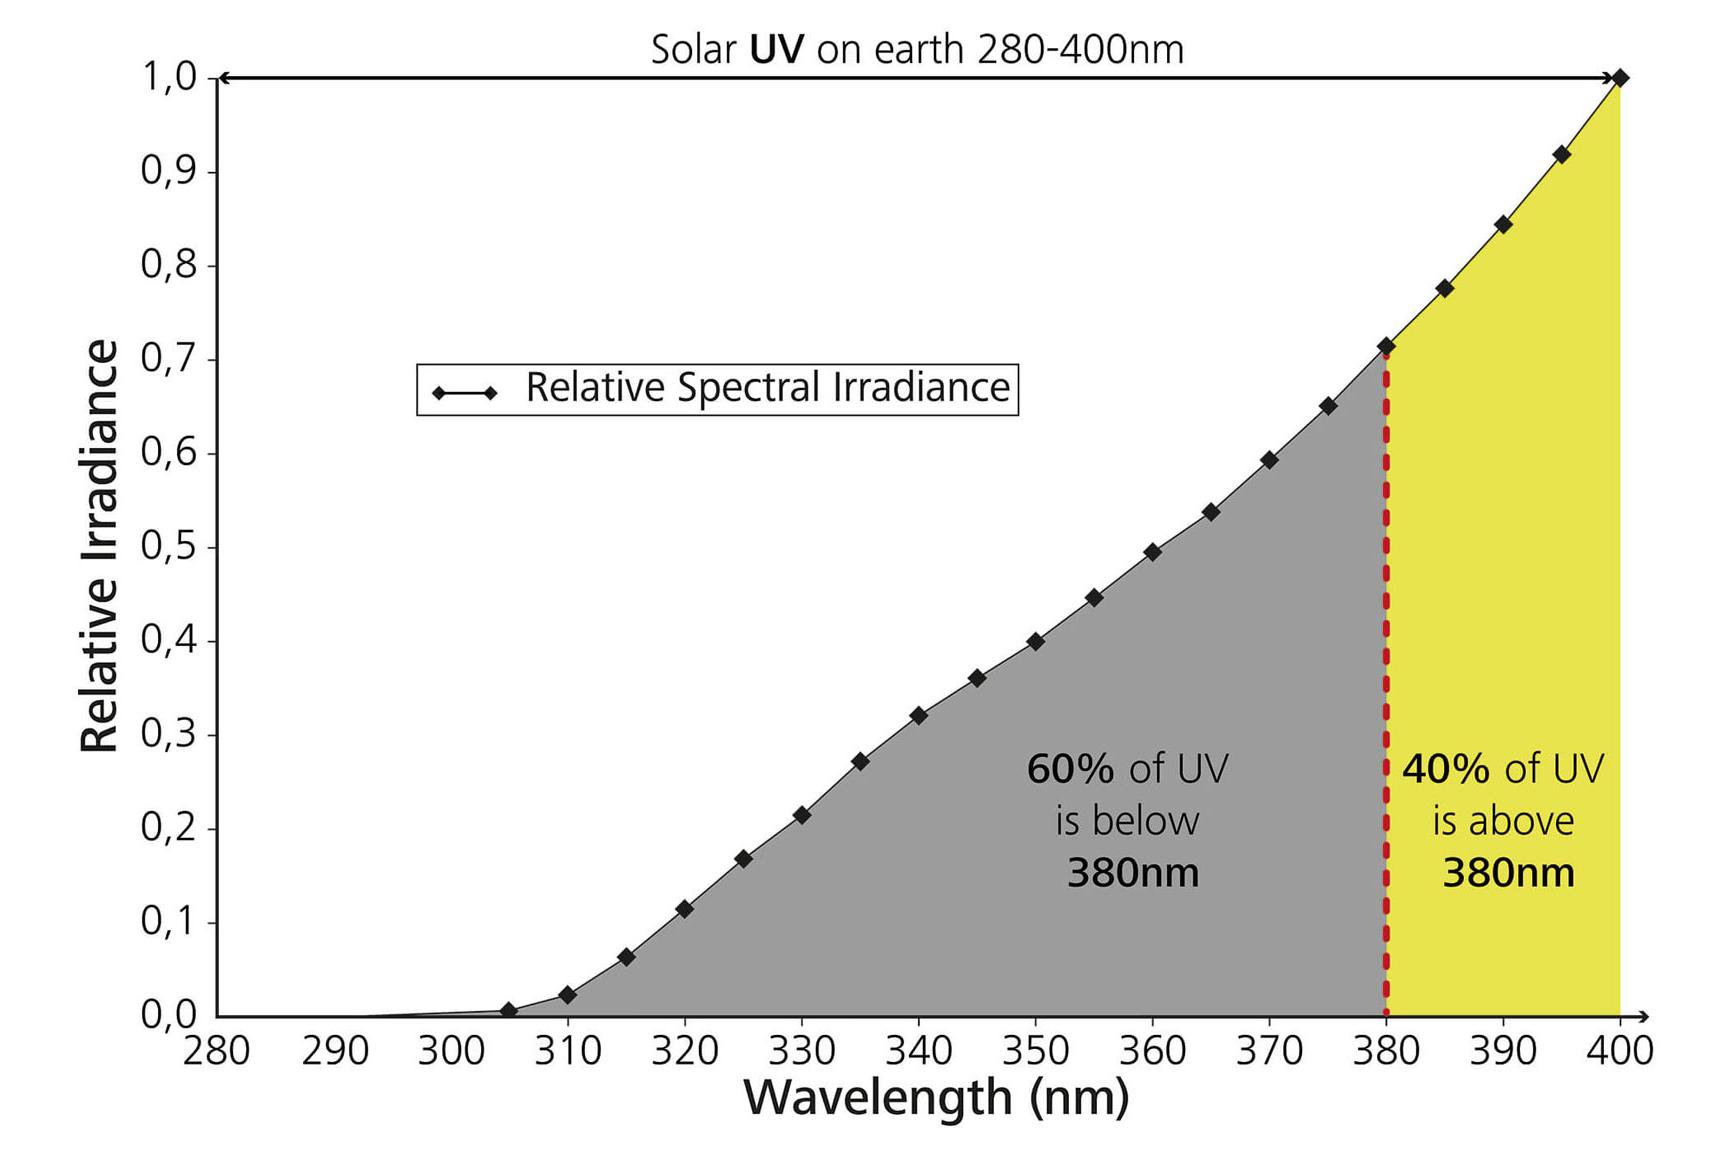 Figure 1: Solar UV spectrum as per DIN EN ISO 8980-3 normalized to the radiation value at 400 nm wavelength.